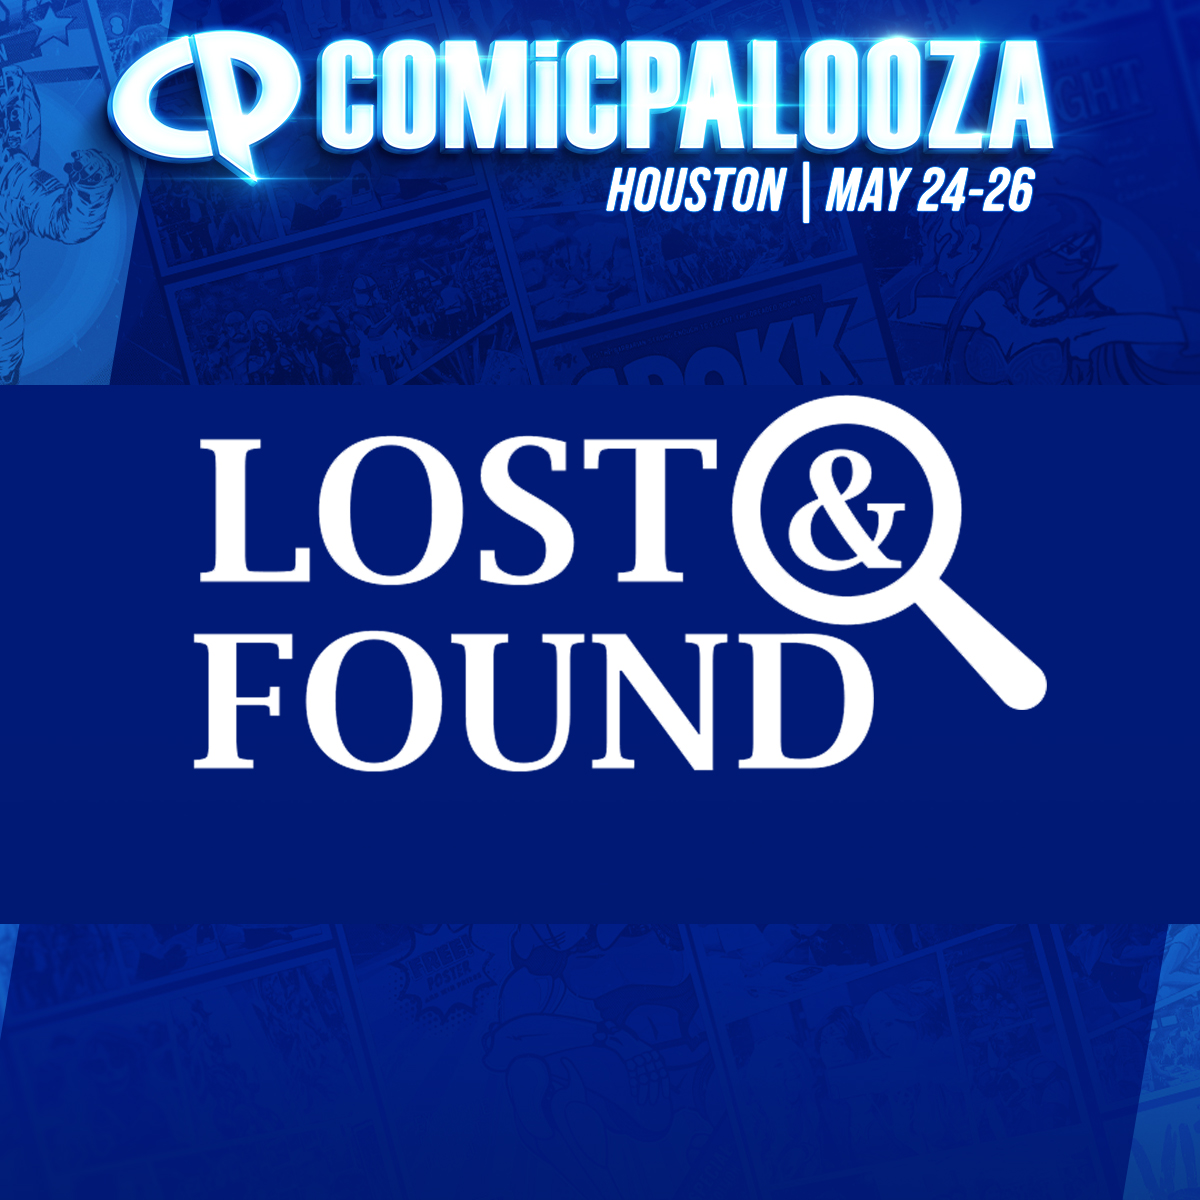 If you lost it, we may have found it. Reach out to us at comicpalooza.com/contact/ and if you inquire about an item, like a purse, make sure to include any identifying factors such as a pattern, color, or name written on it.